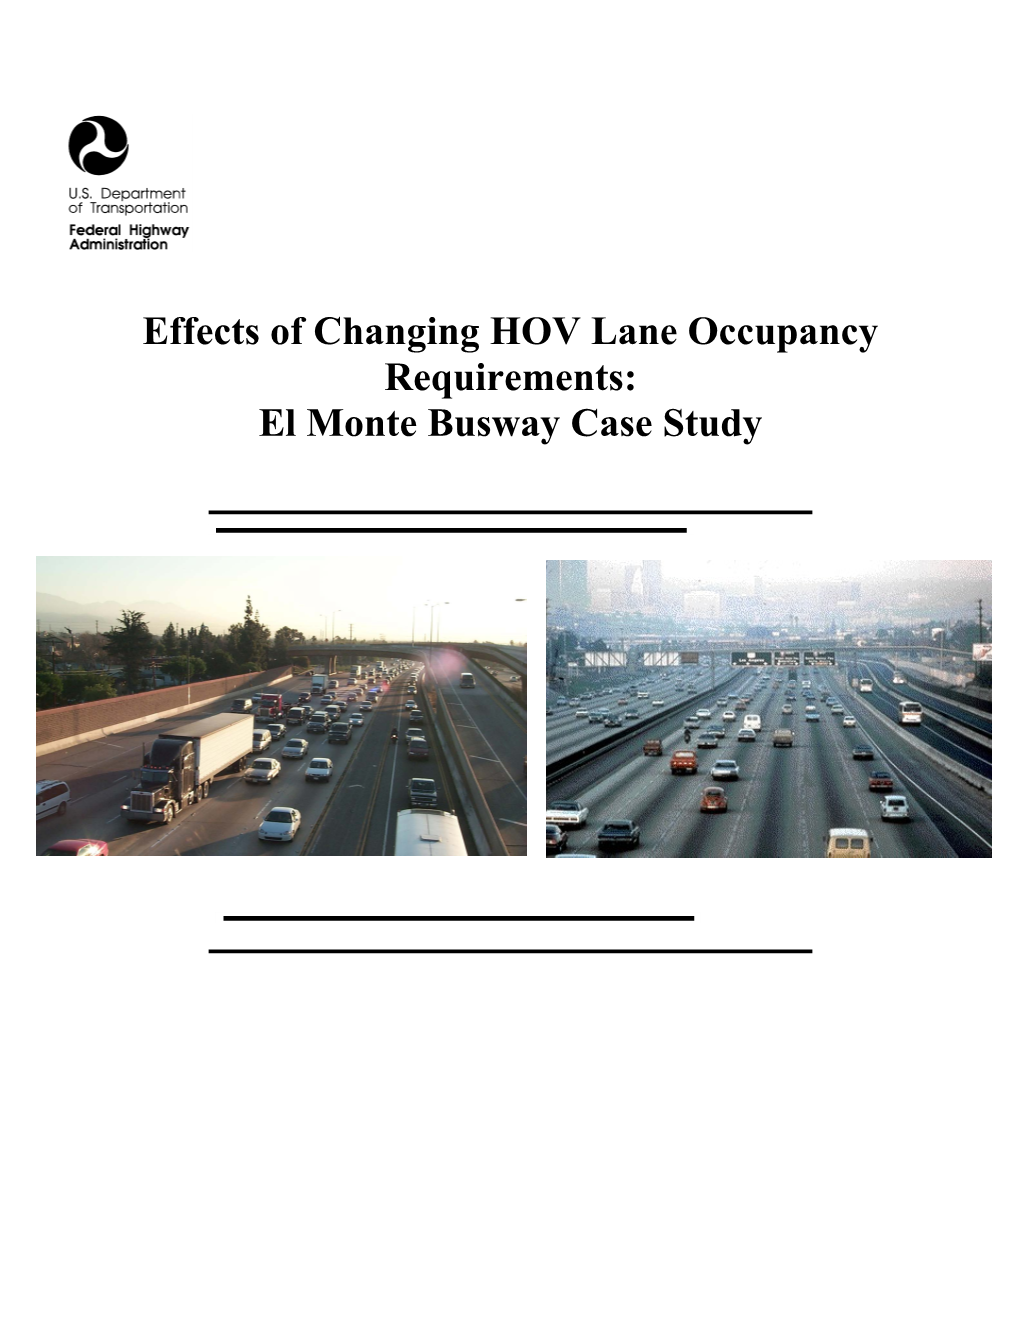 Effects of Changing HOV Lane Occupancy Requirements